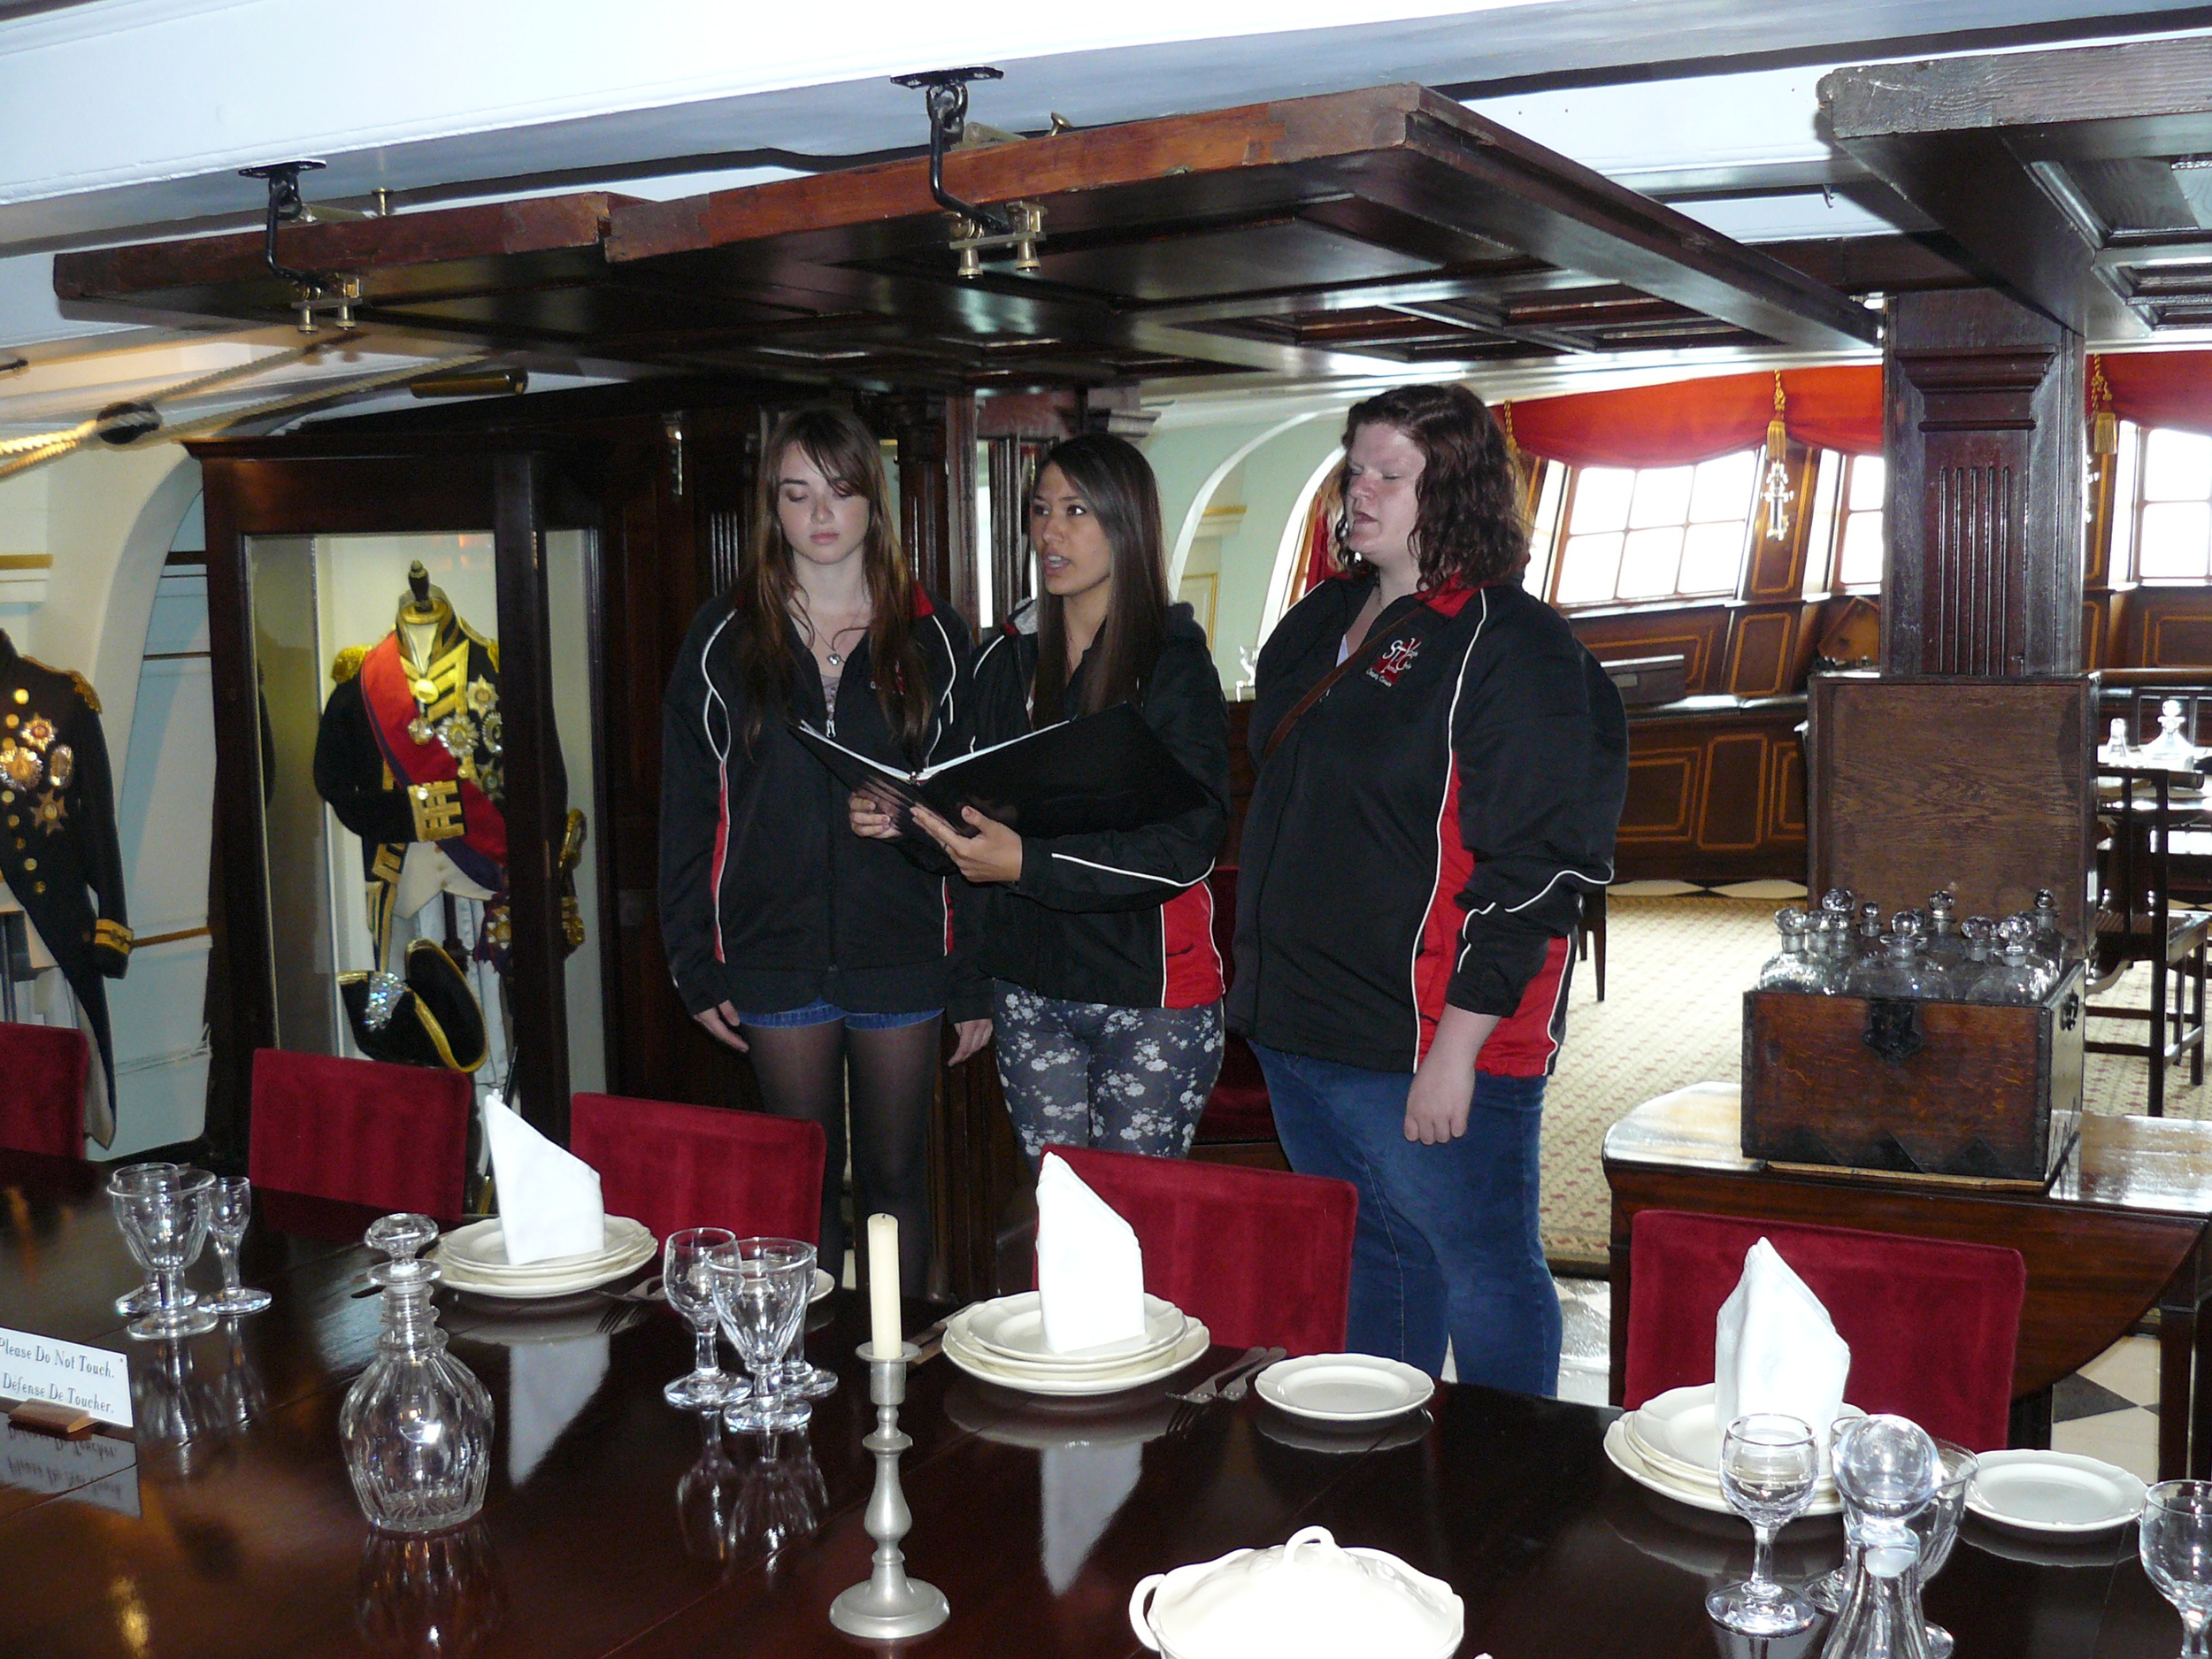  Singing in Lord Nelson's cabin on the HMS Victory.​ 